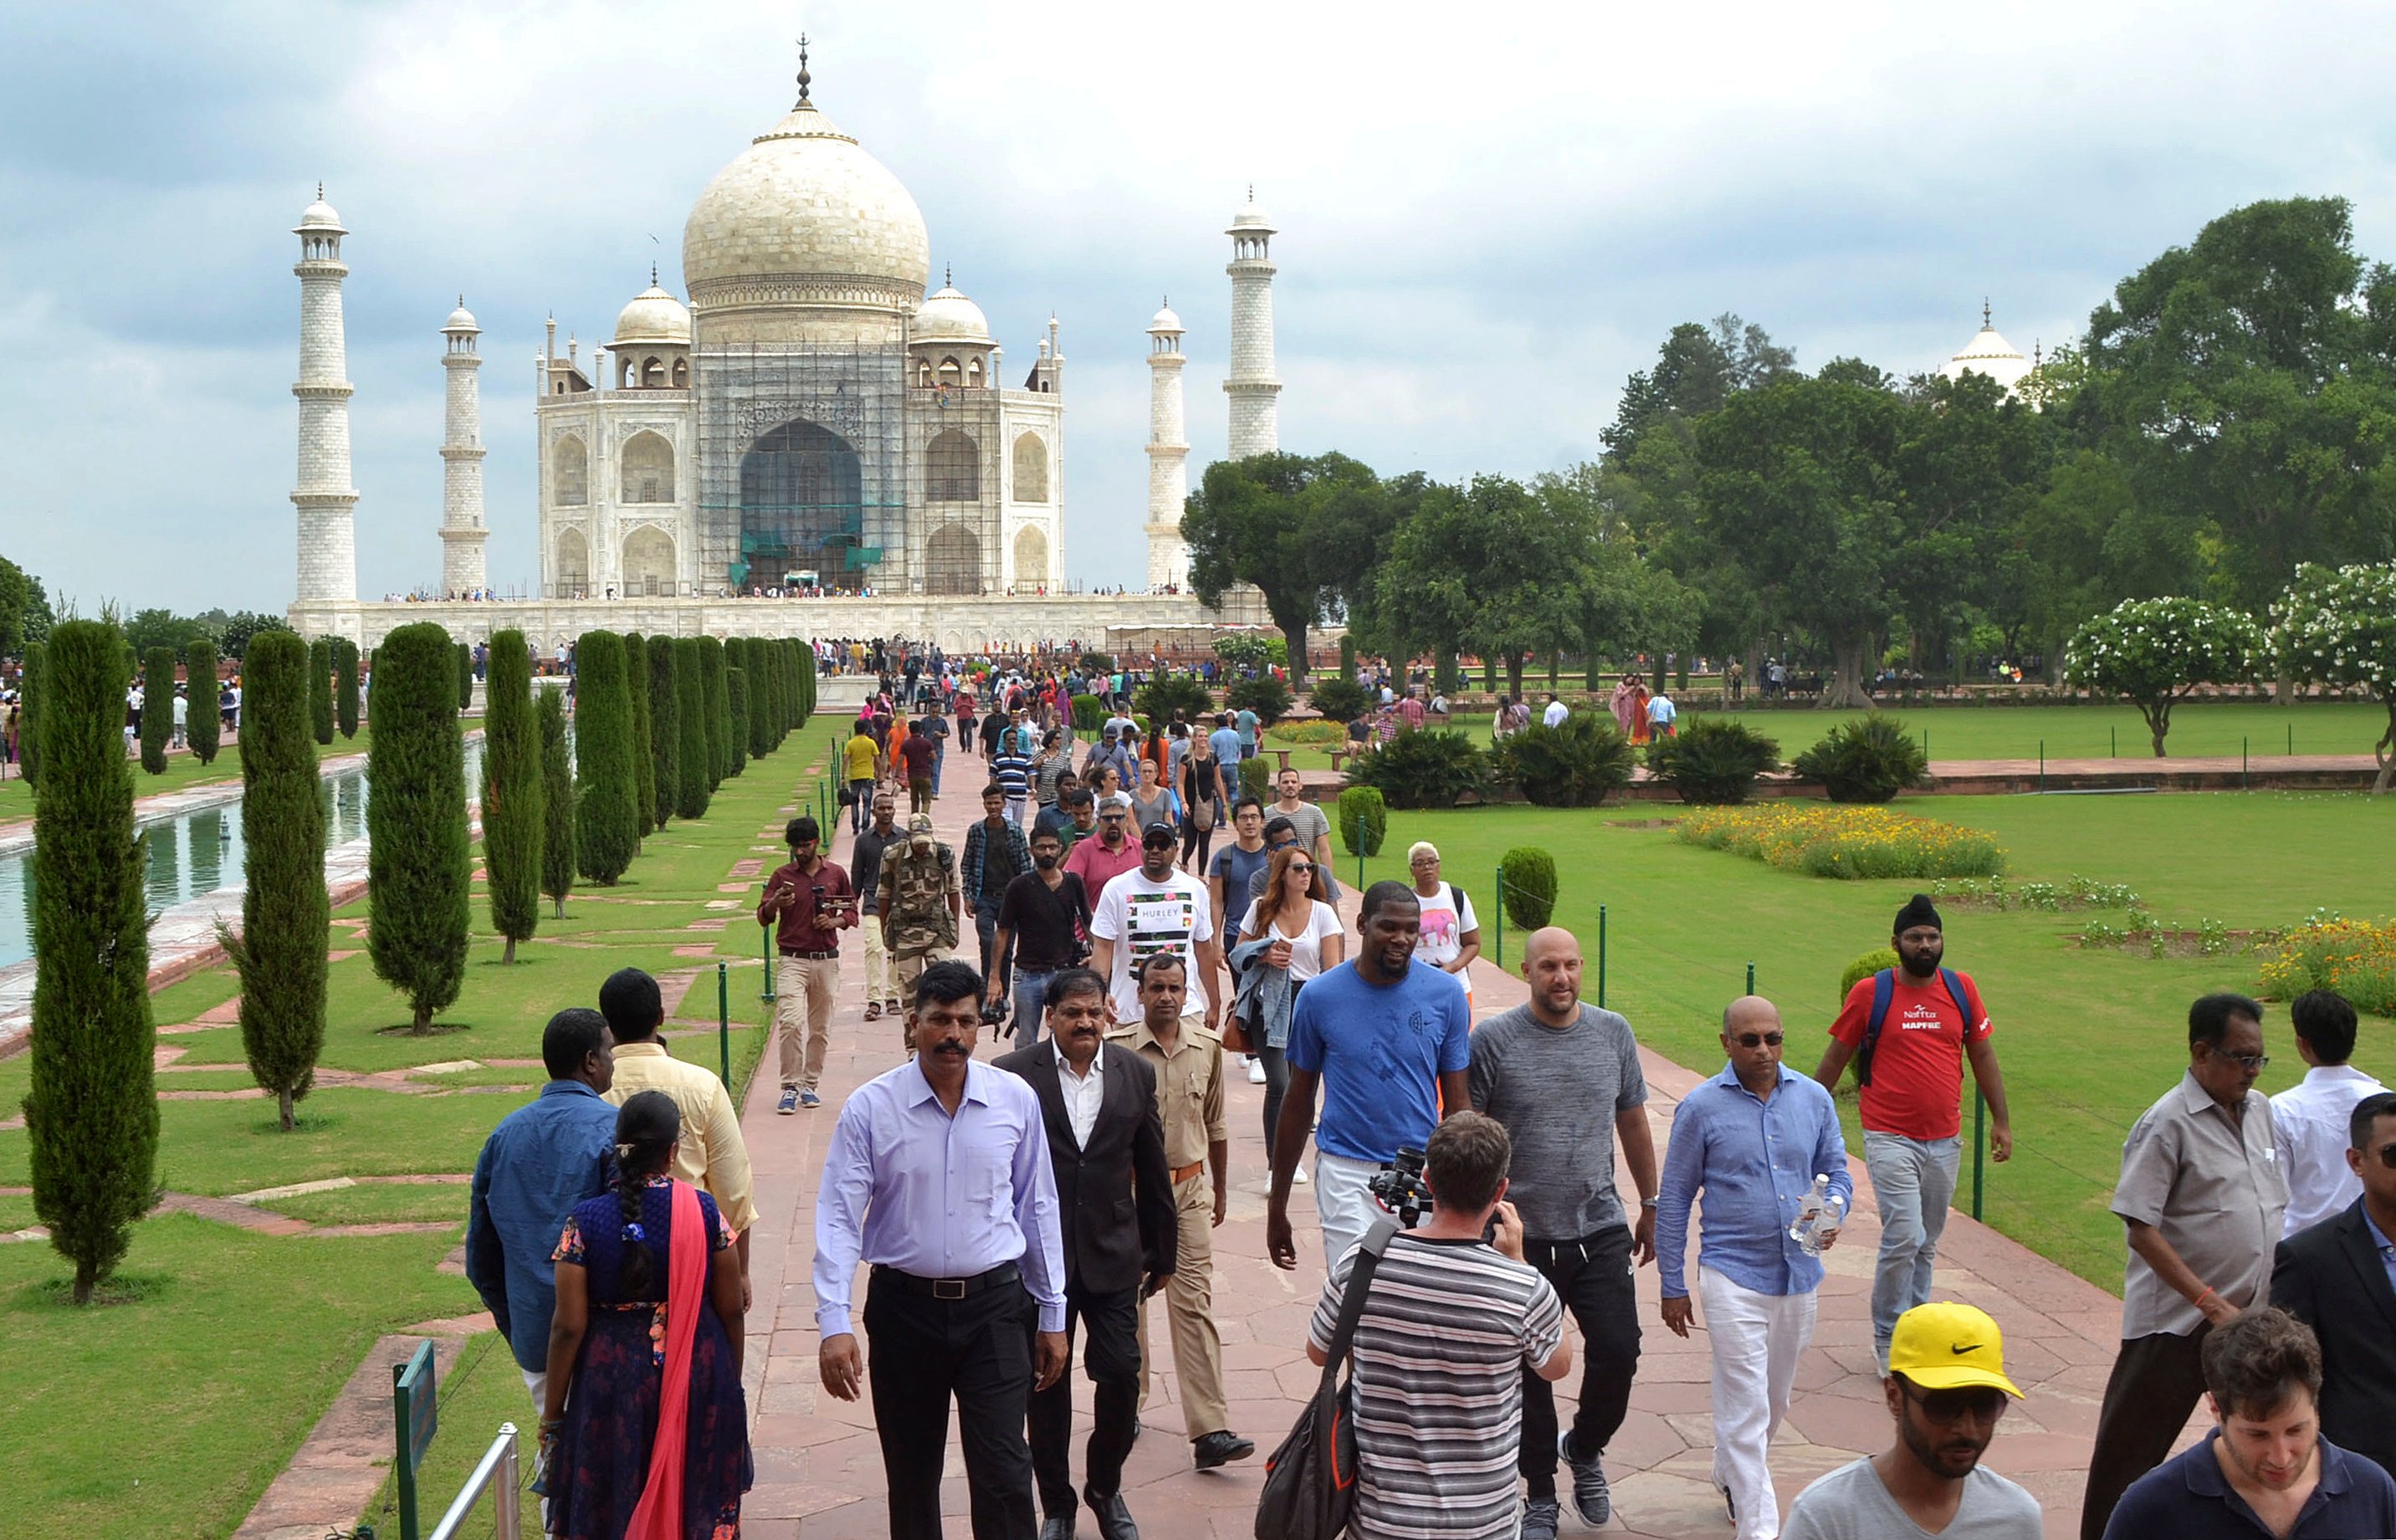 NBA basketball player Kevin Durant, center in blue t-shirt, walks in front of Taj Mahal in Agra, India, Saturday, July 29, 2017. Durant is in India to support the continued growth of basketball in the country and meet the elite prospects of NBA Academy India. (AP Photo/Pawan Sharma)